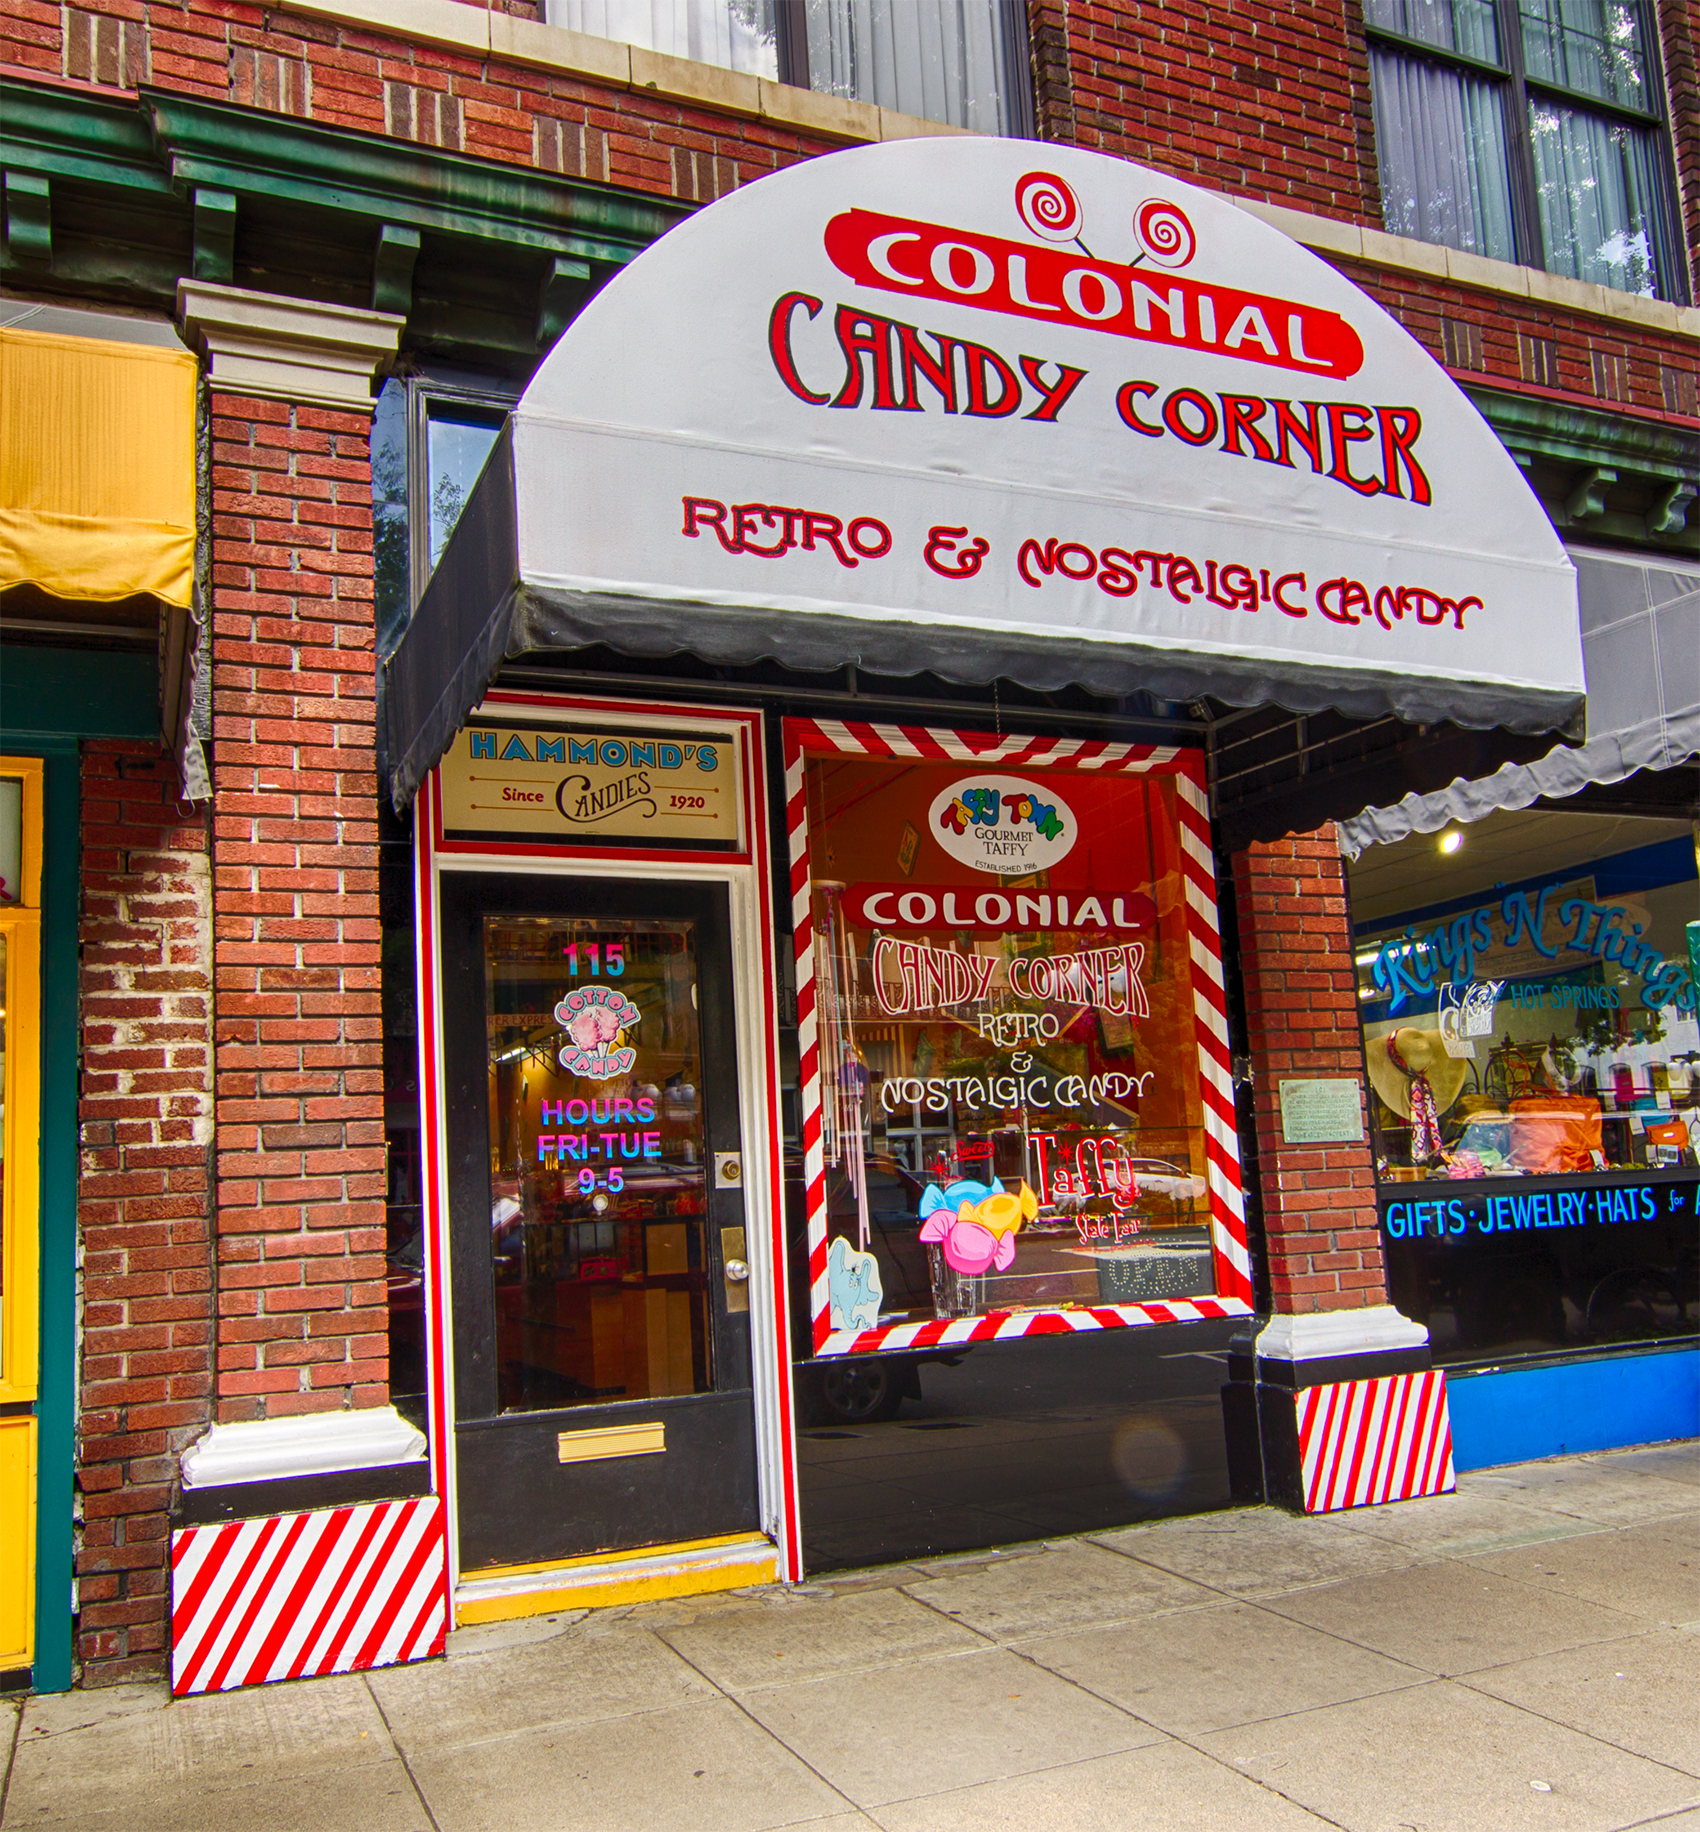 Colonial Candy Corner